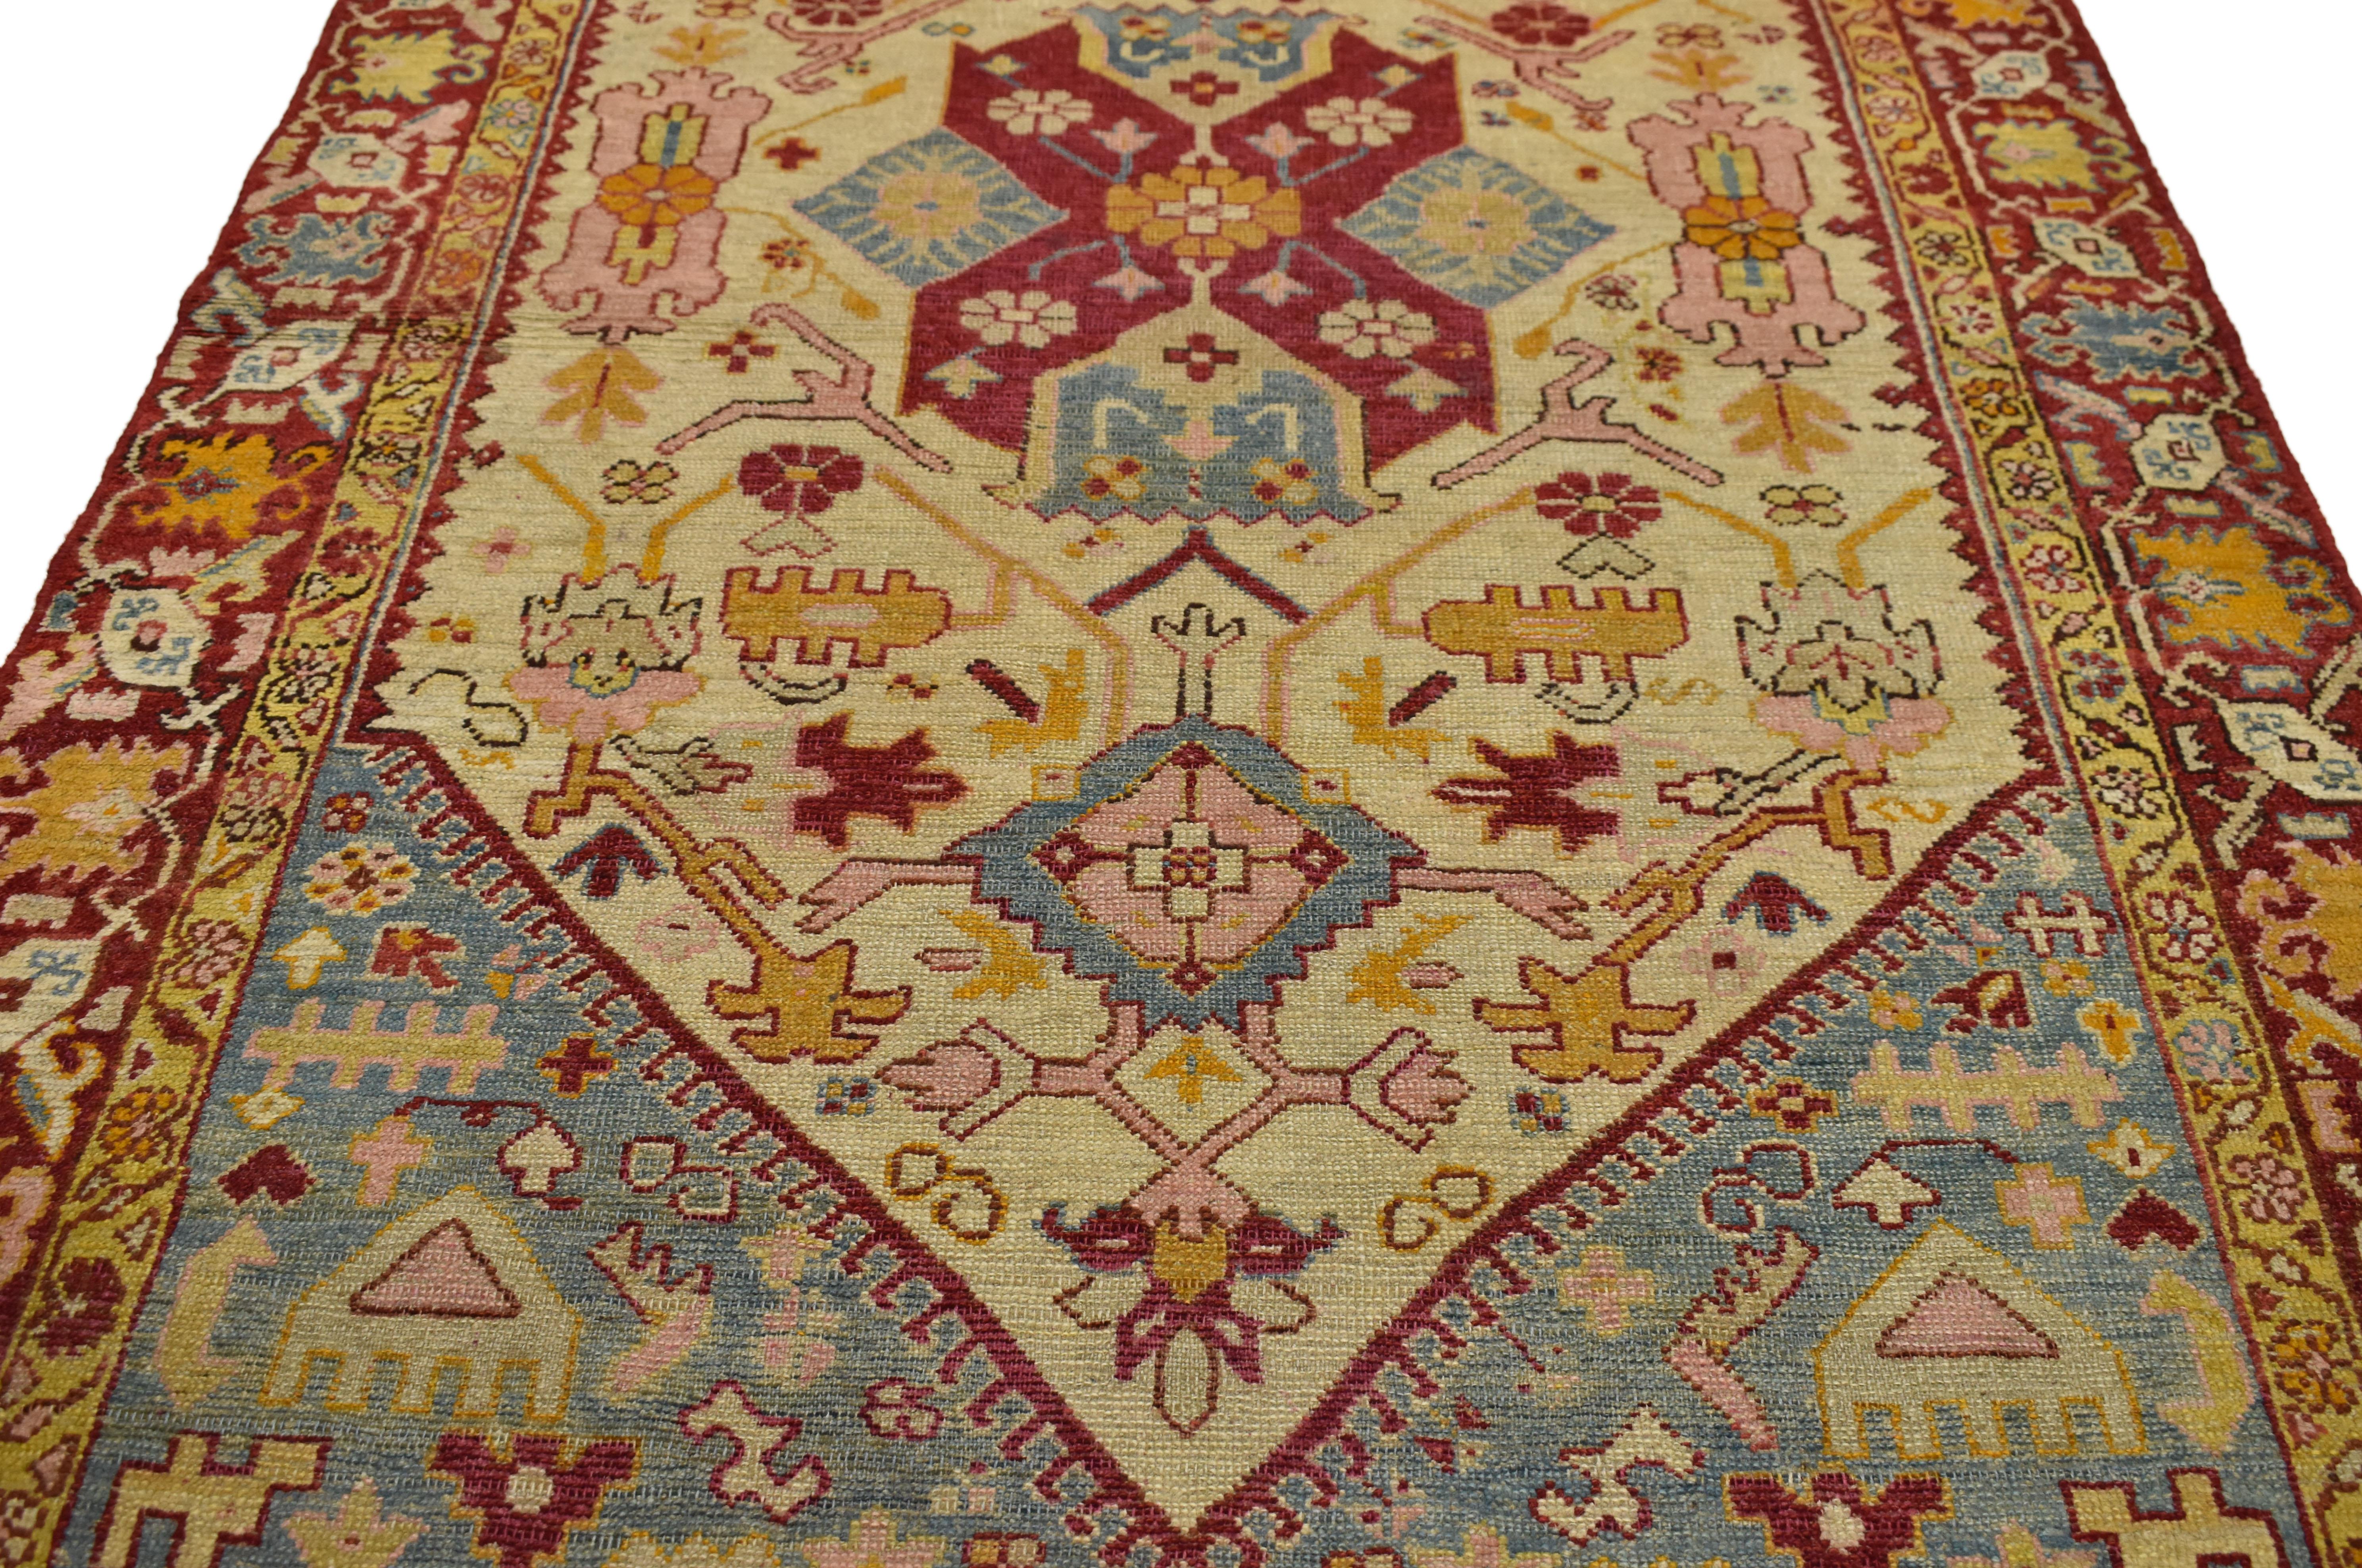 73905, vintage Turkish Oushak accent rug, entry or foyer rug. This hand knotted wool vintage Turkish Oushak rug features a large floral center medallion surrounded by a variety of floral motifs and Anatolian symbols. Shapes and symbols fill the